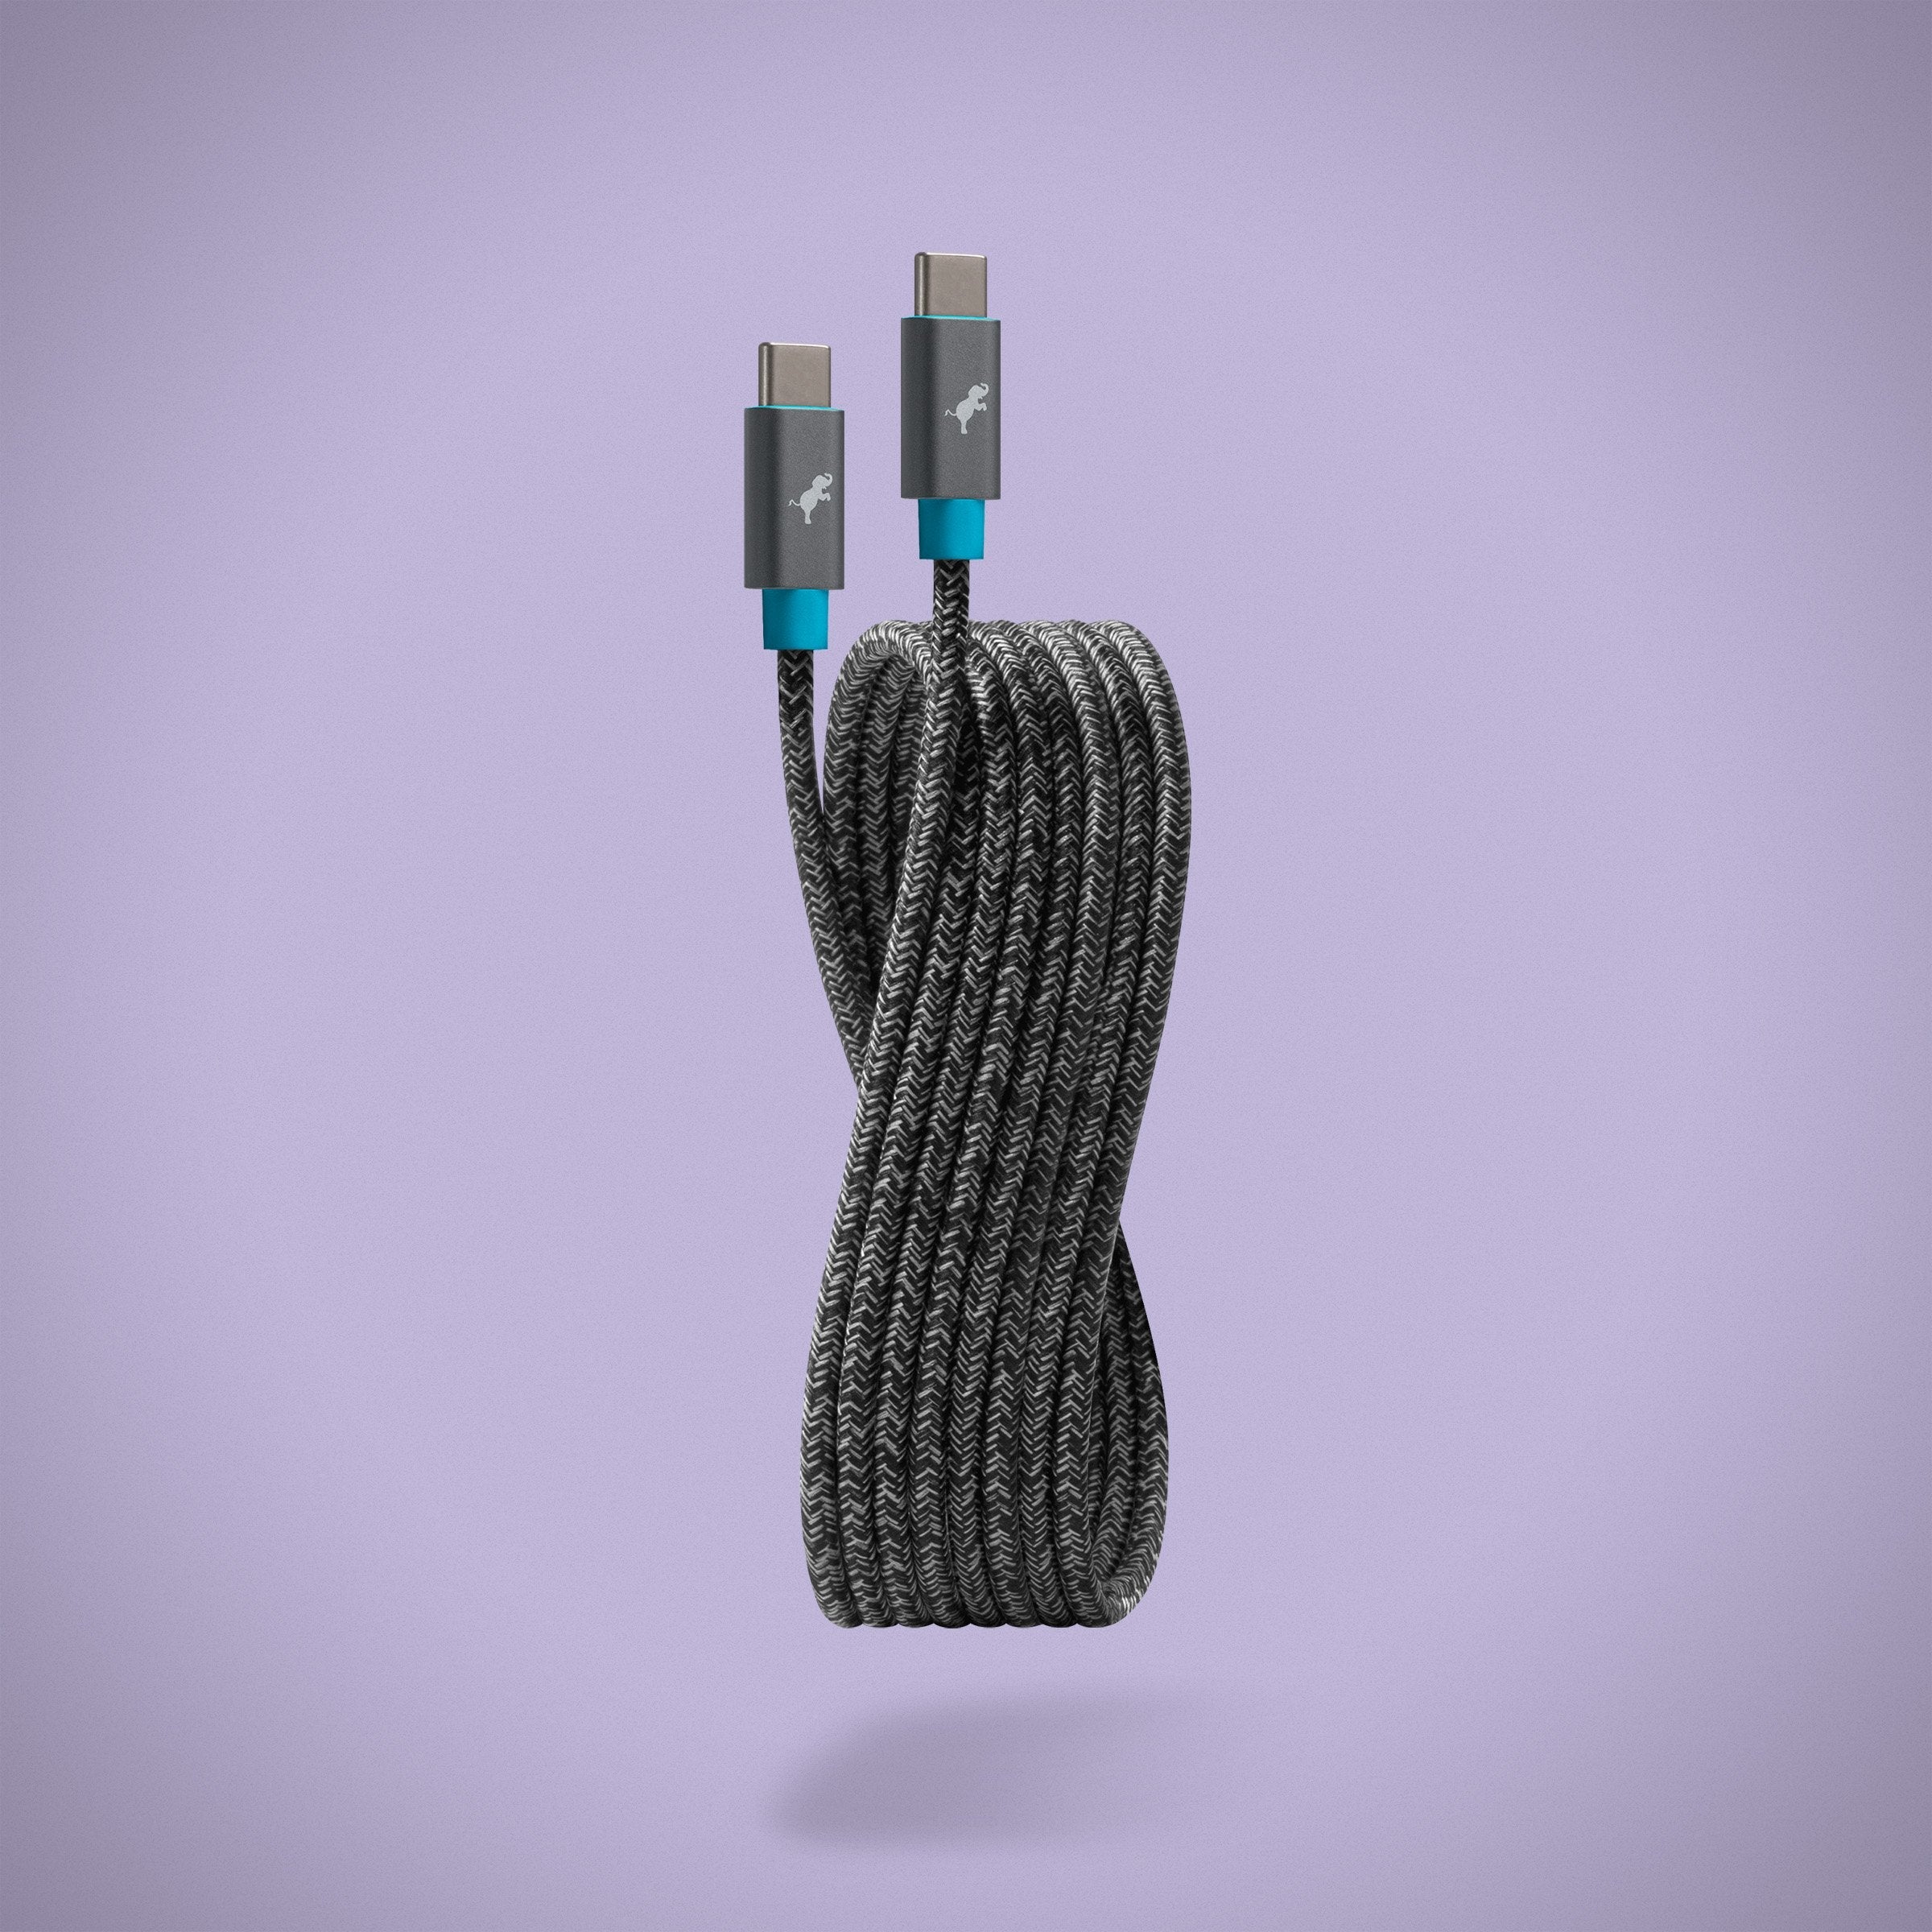 PowerKnit USB-C to USB-C Cable Charging Cable Nimble 